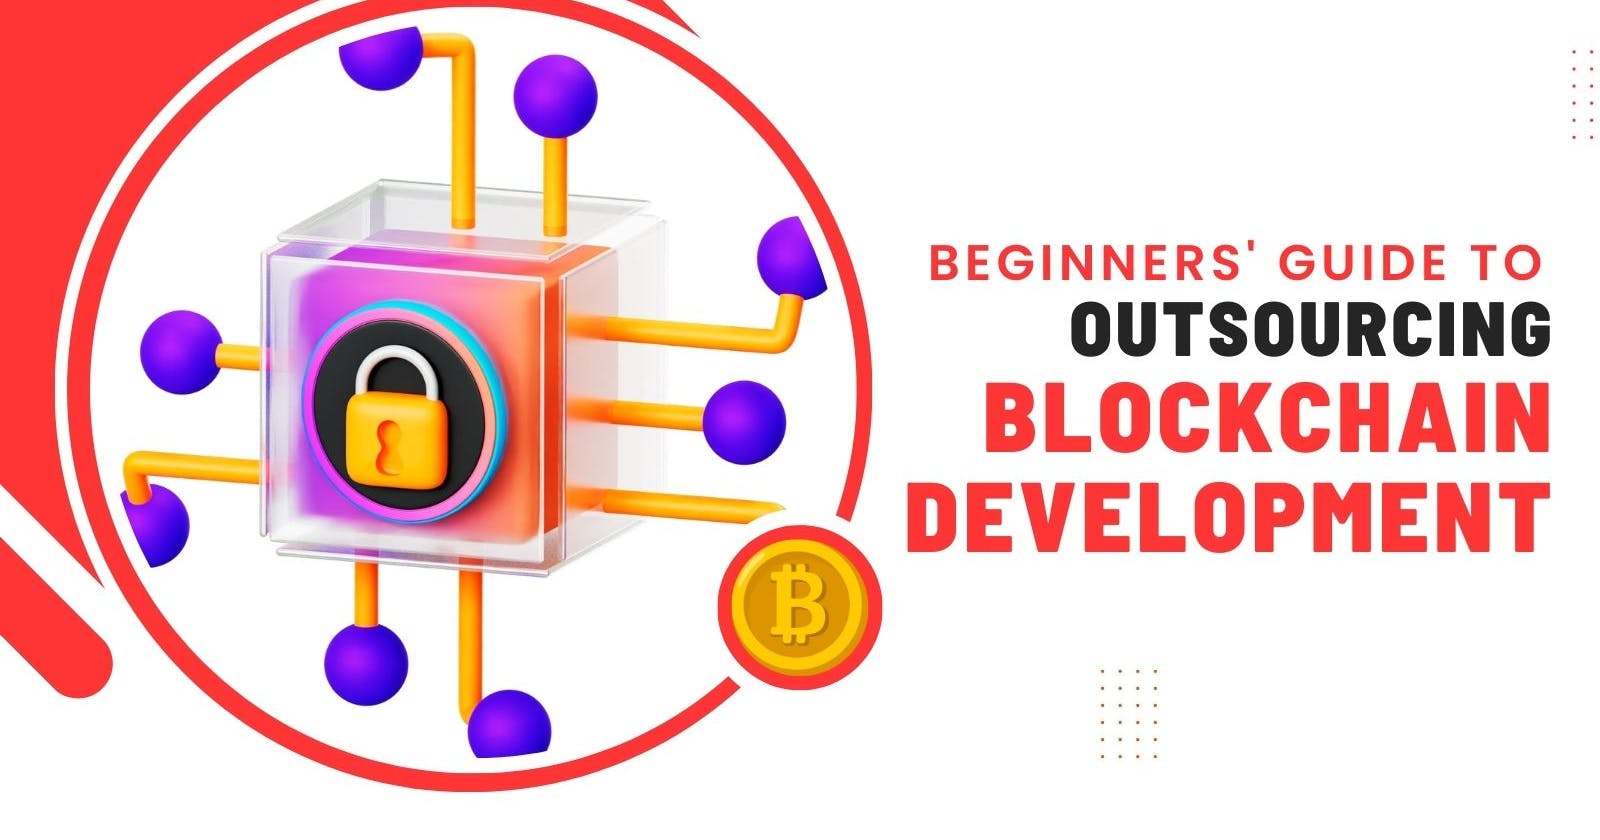 Beginners' Guide to Outsourcing Blockchain Development